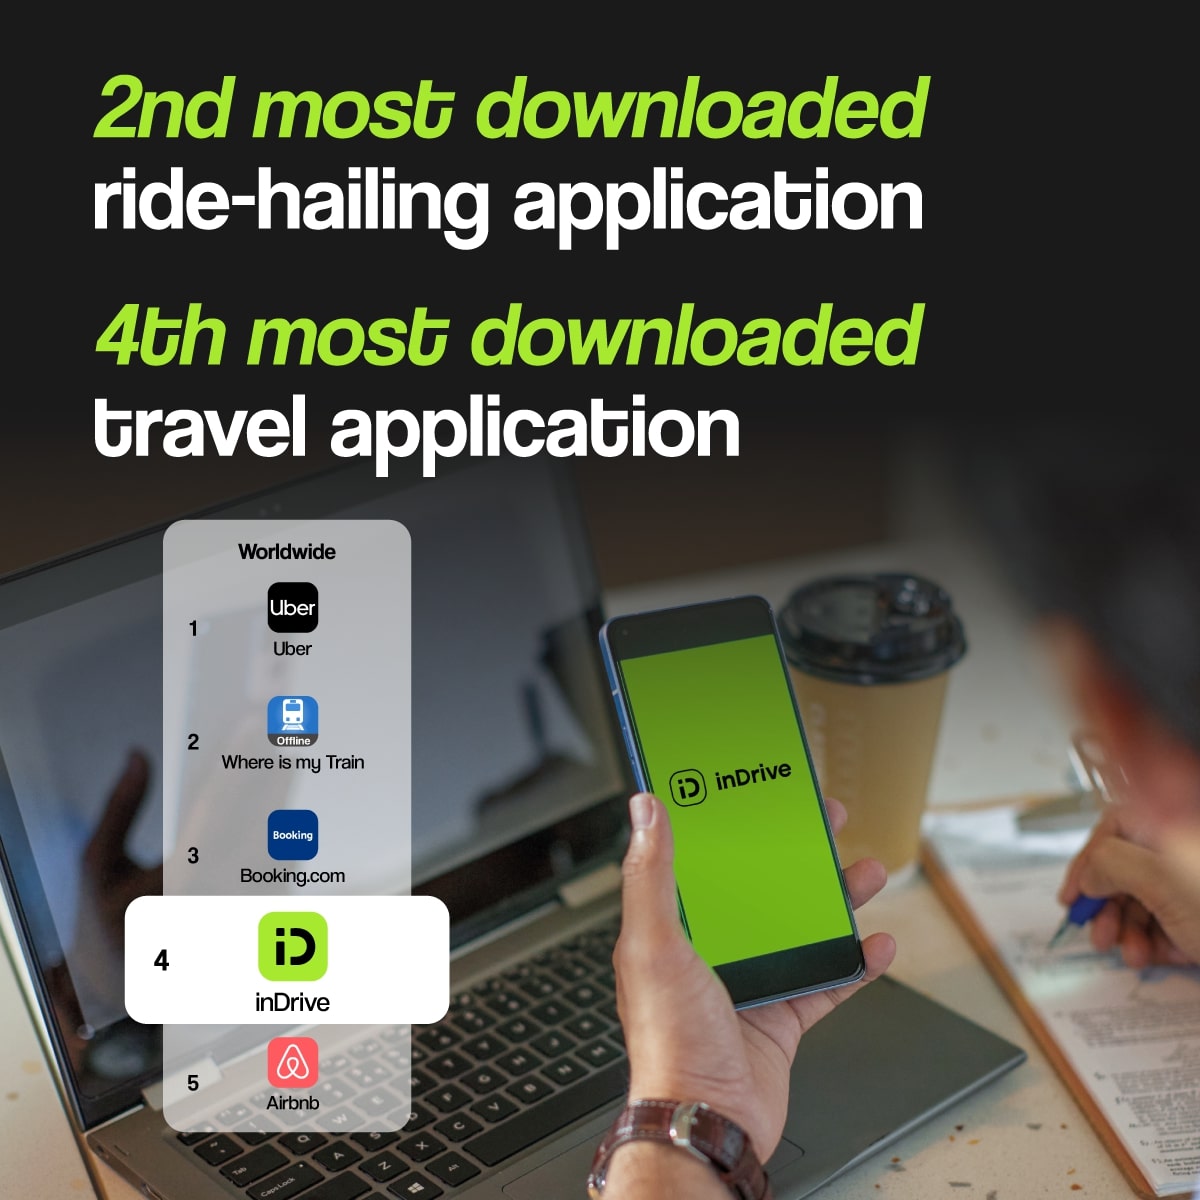 inDrive remains the world’s 2nd most downloaded ride-hailing app & ranks as 4th most downloaded travel app worldwide